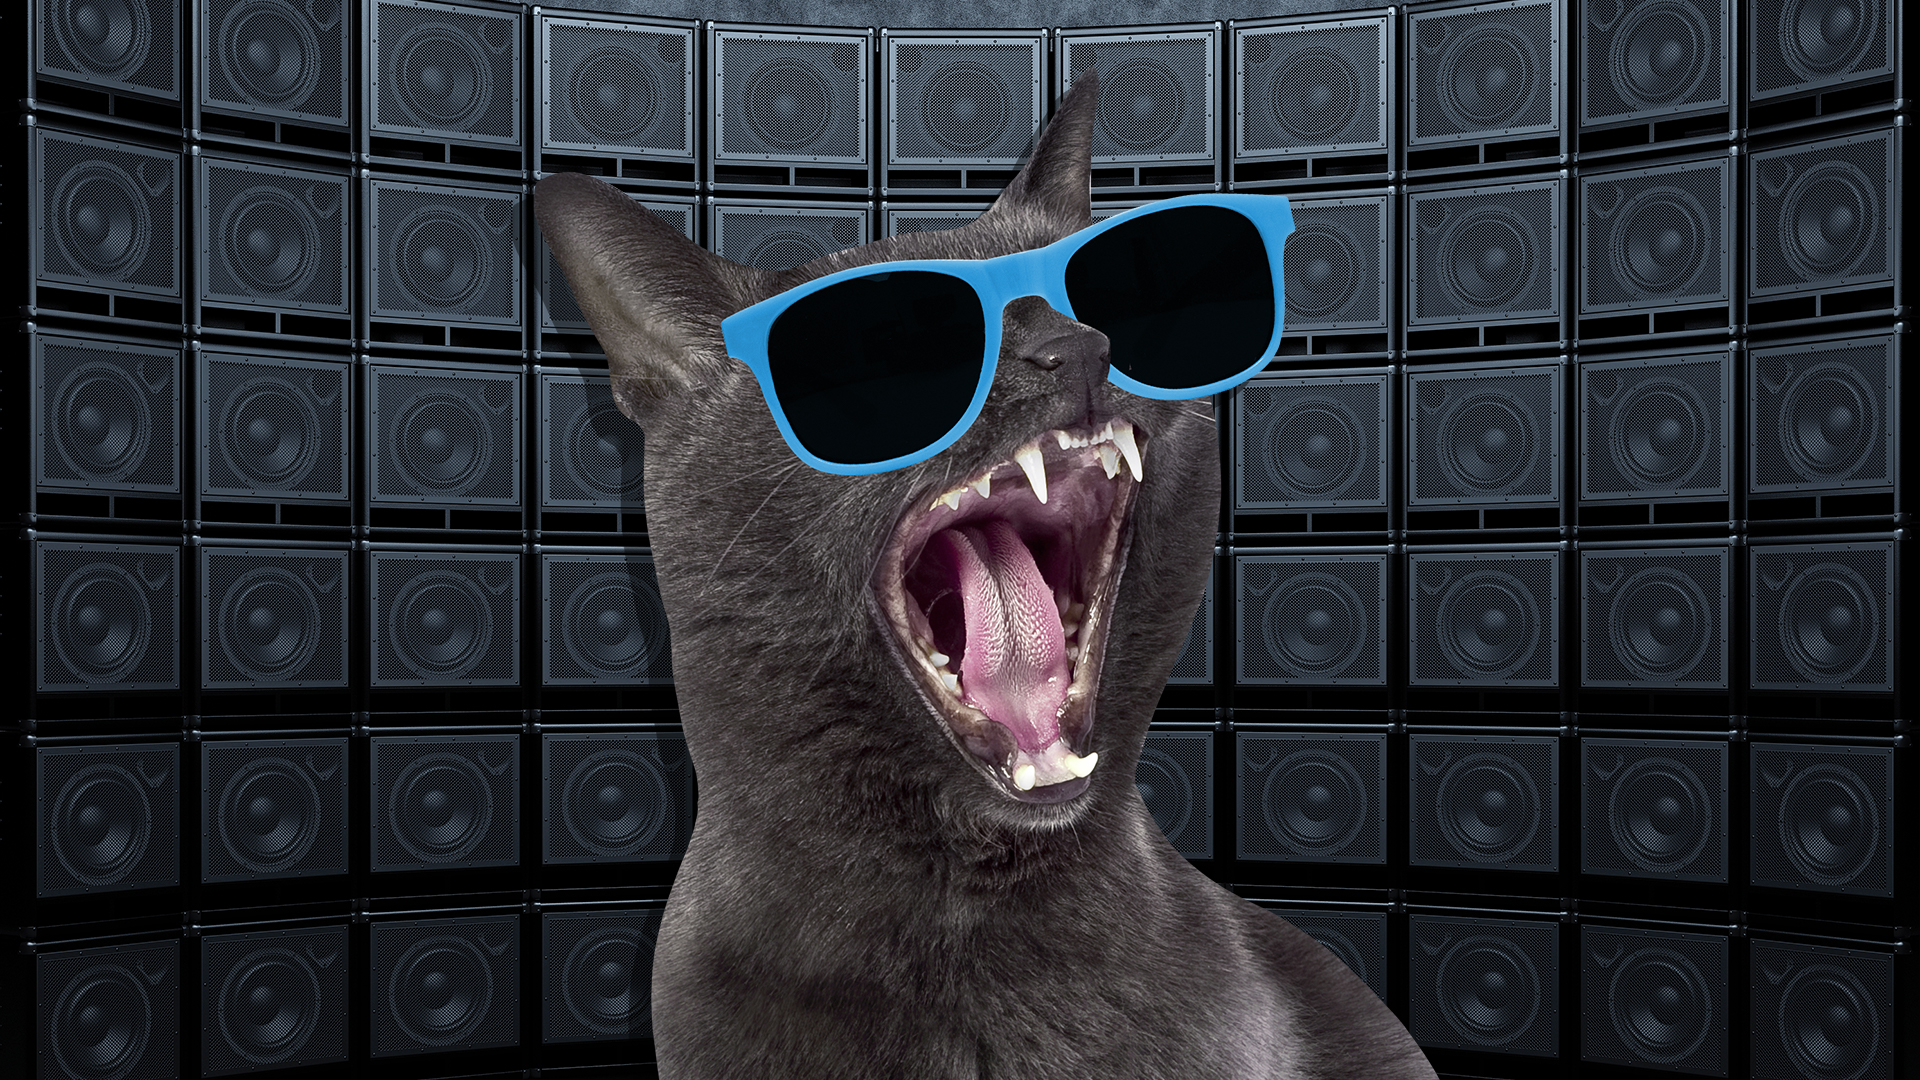 A cat in front of big speakers